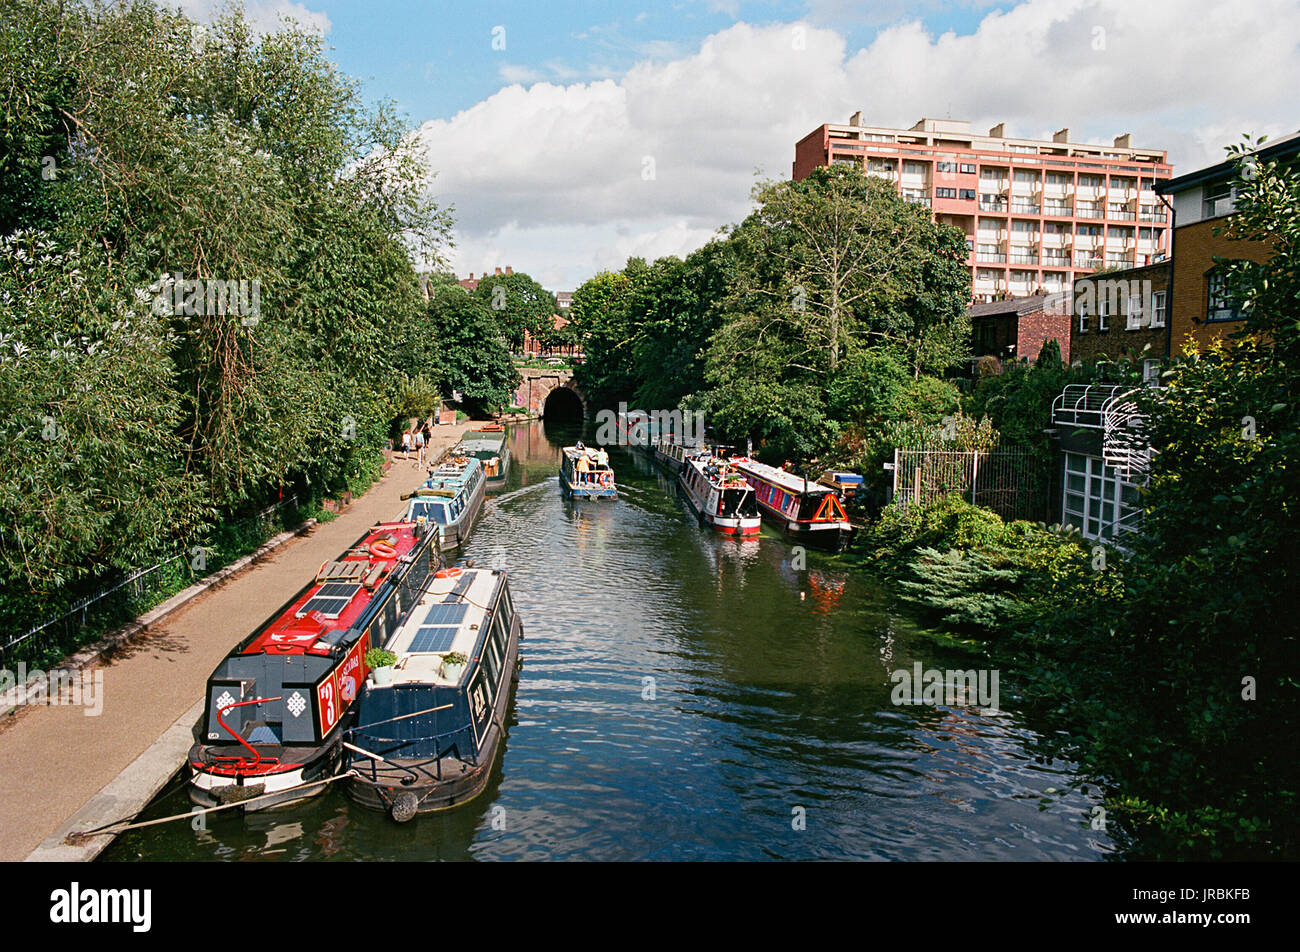 The Regents Canal from the Caledonian Road, near Kings Cross, North London UK, looking towards the Islington Tunnel Stock Photo